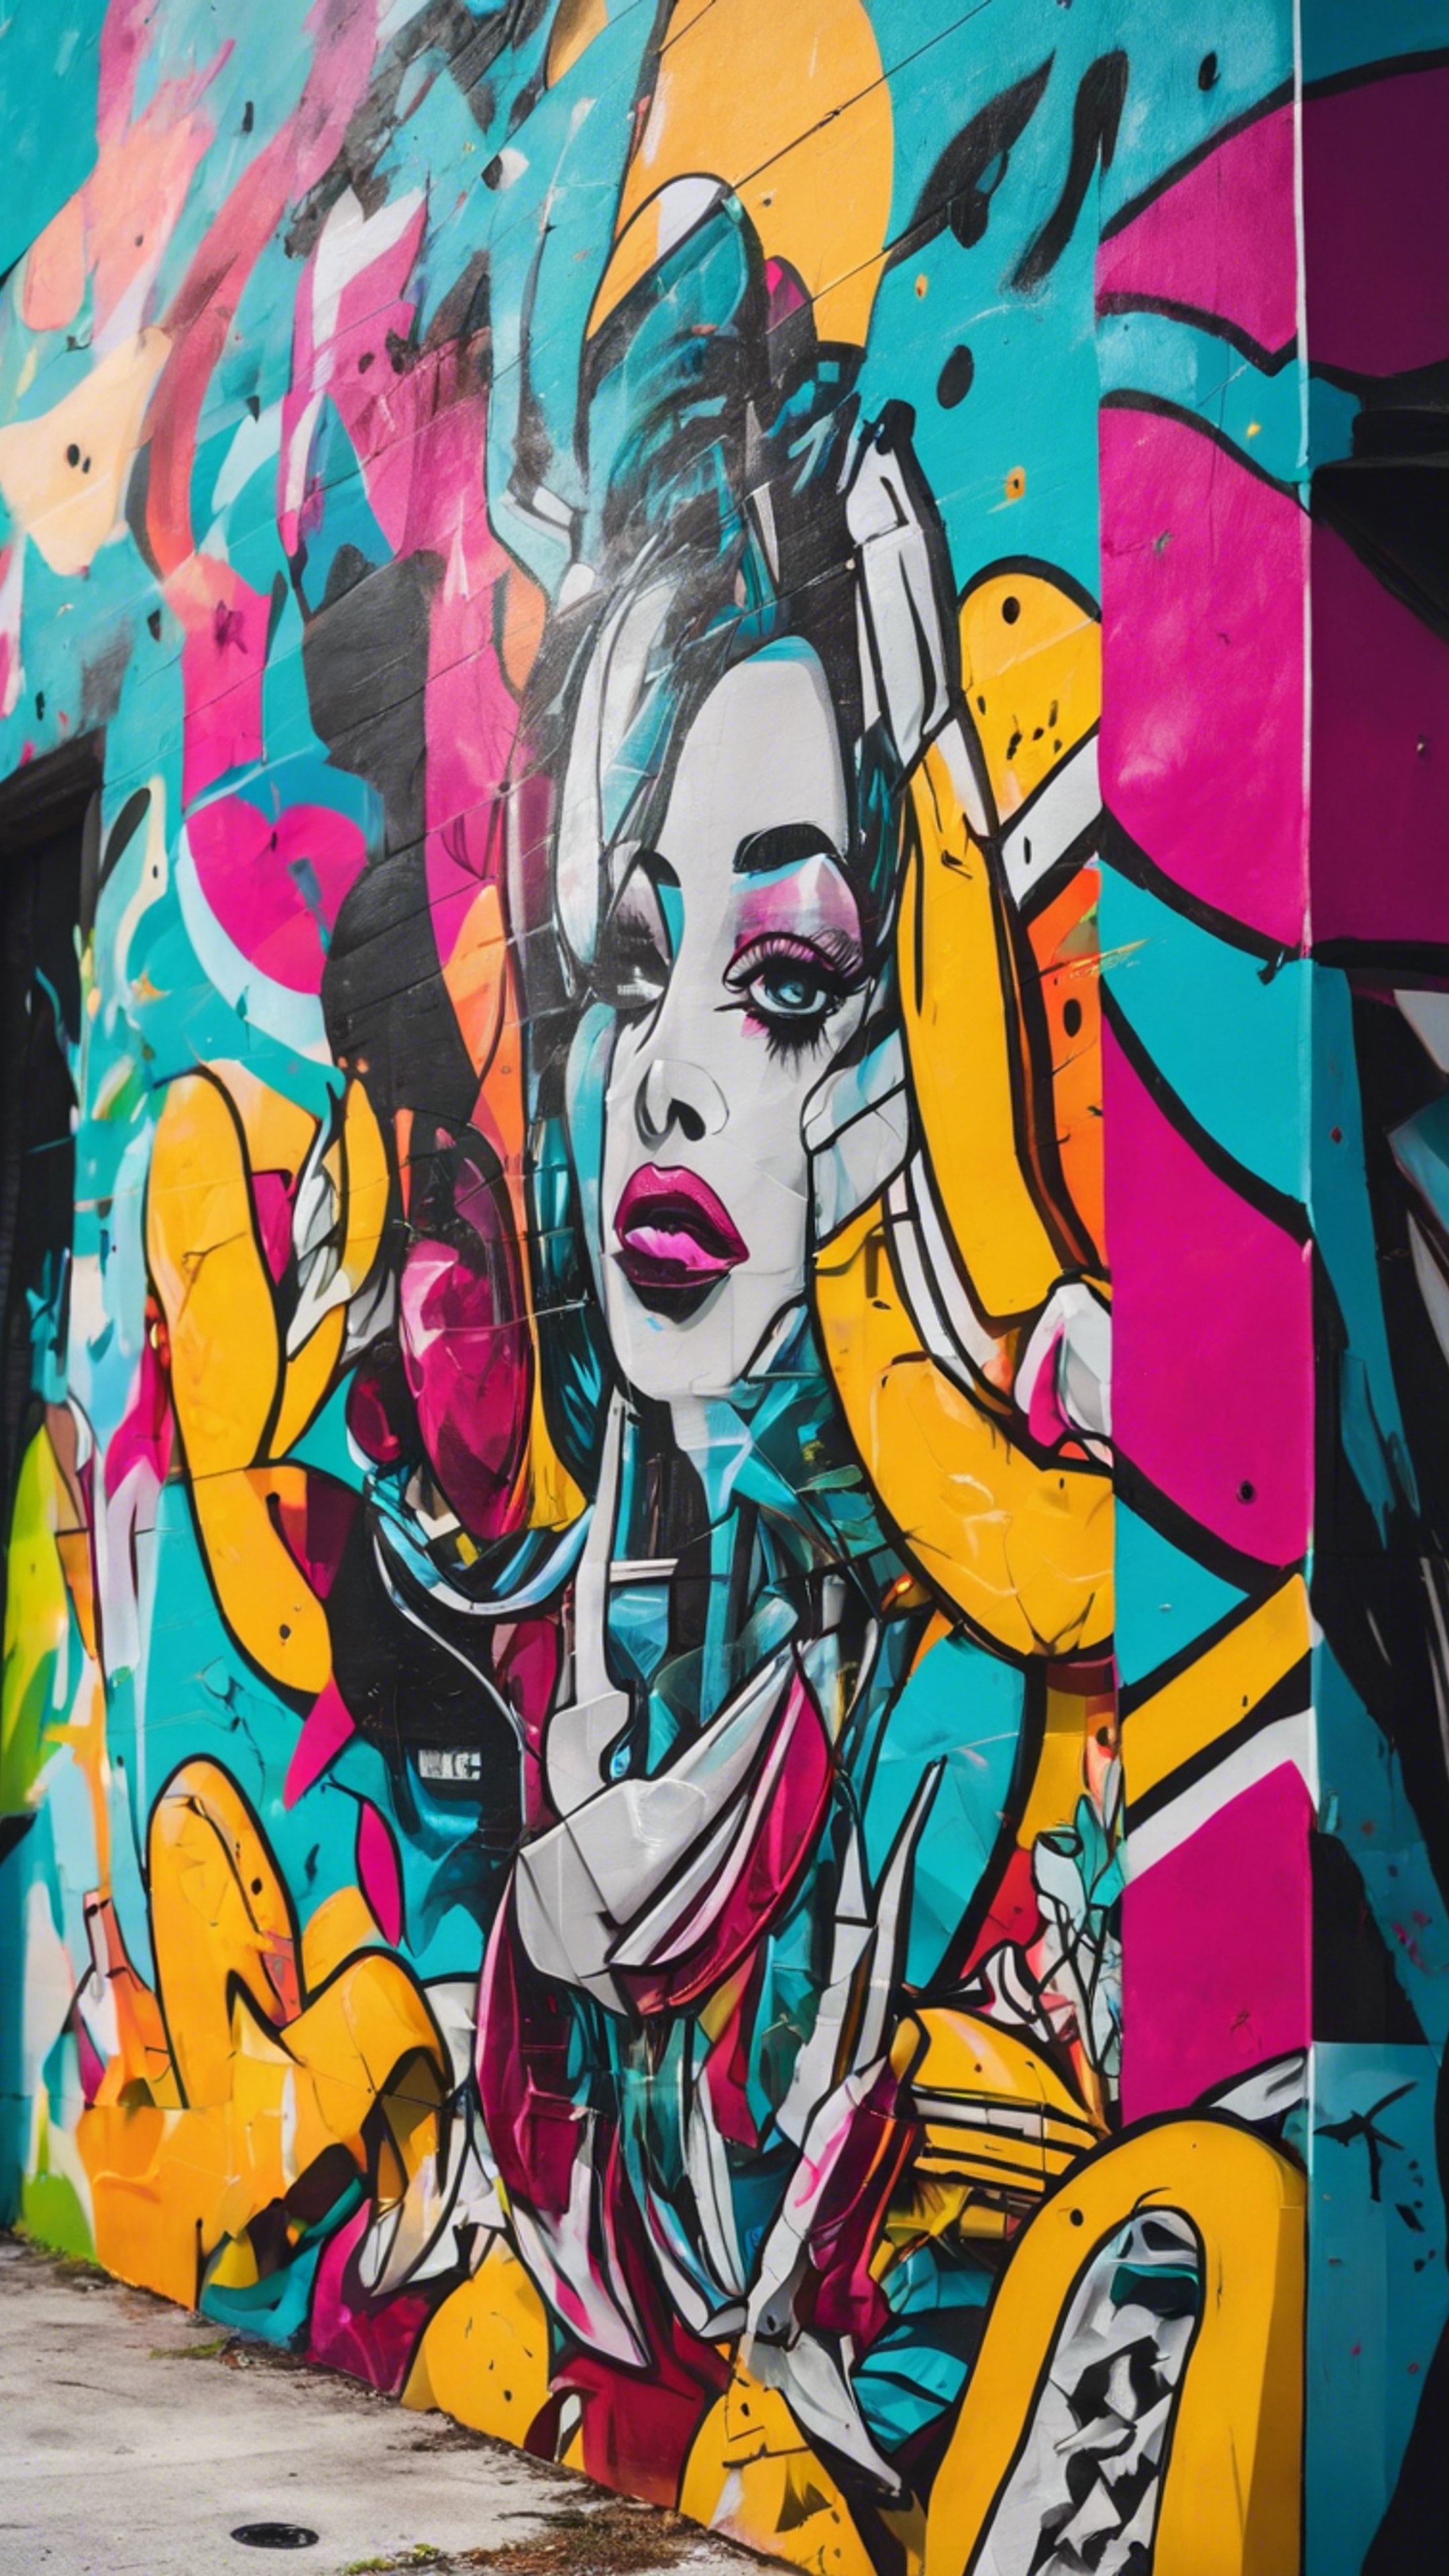 A vibrant street art mural in Wynwood, Miami, featuring abstract art and bright colors. Tapetai[fc74442468964623923a]